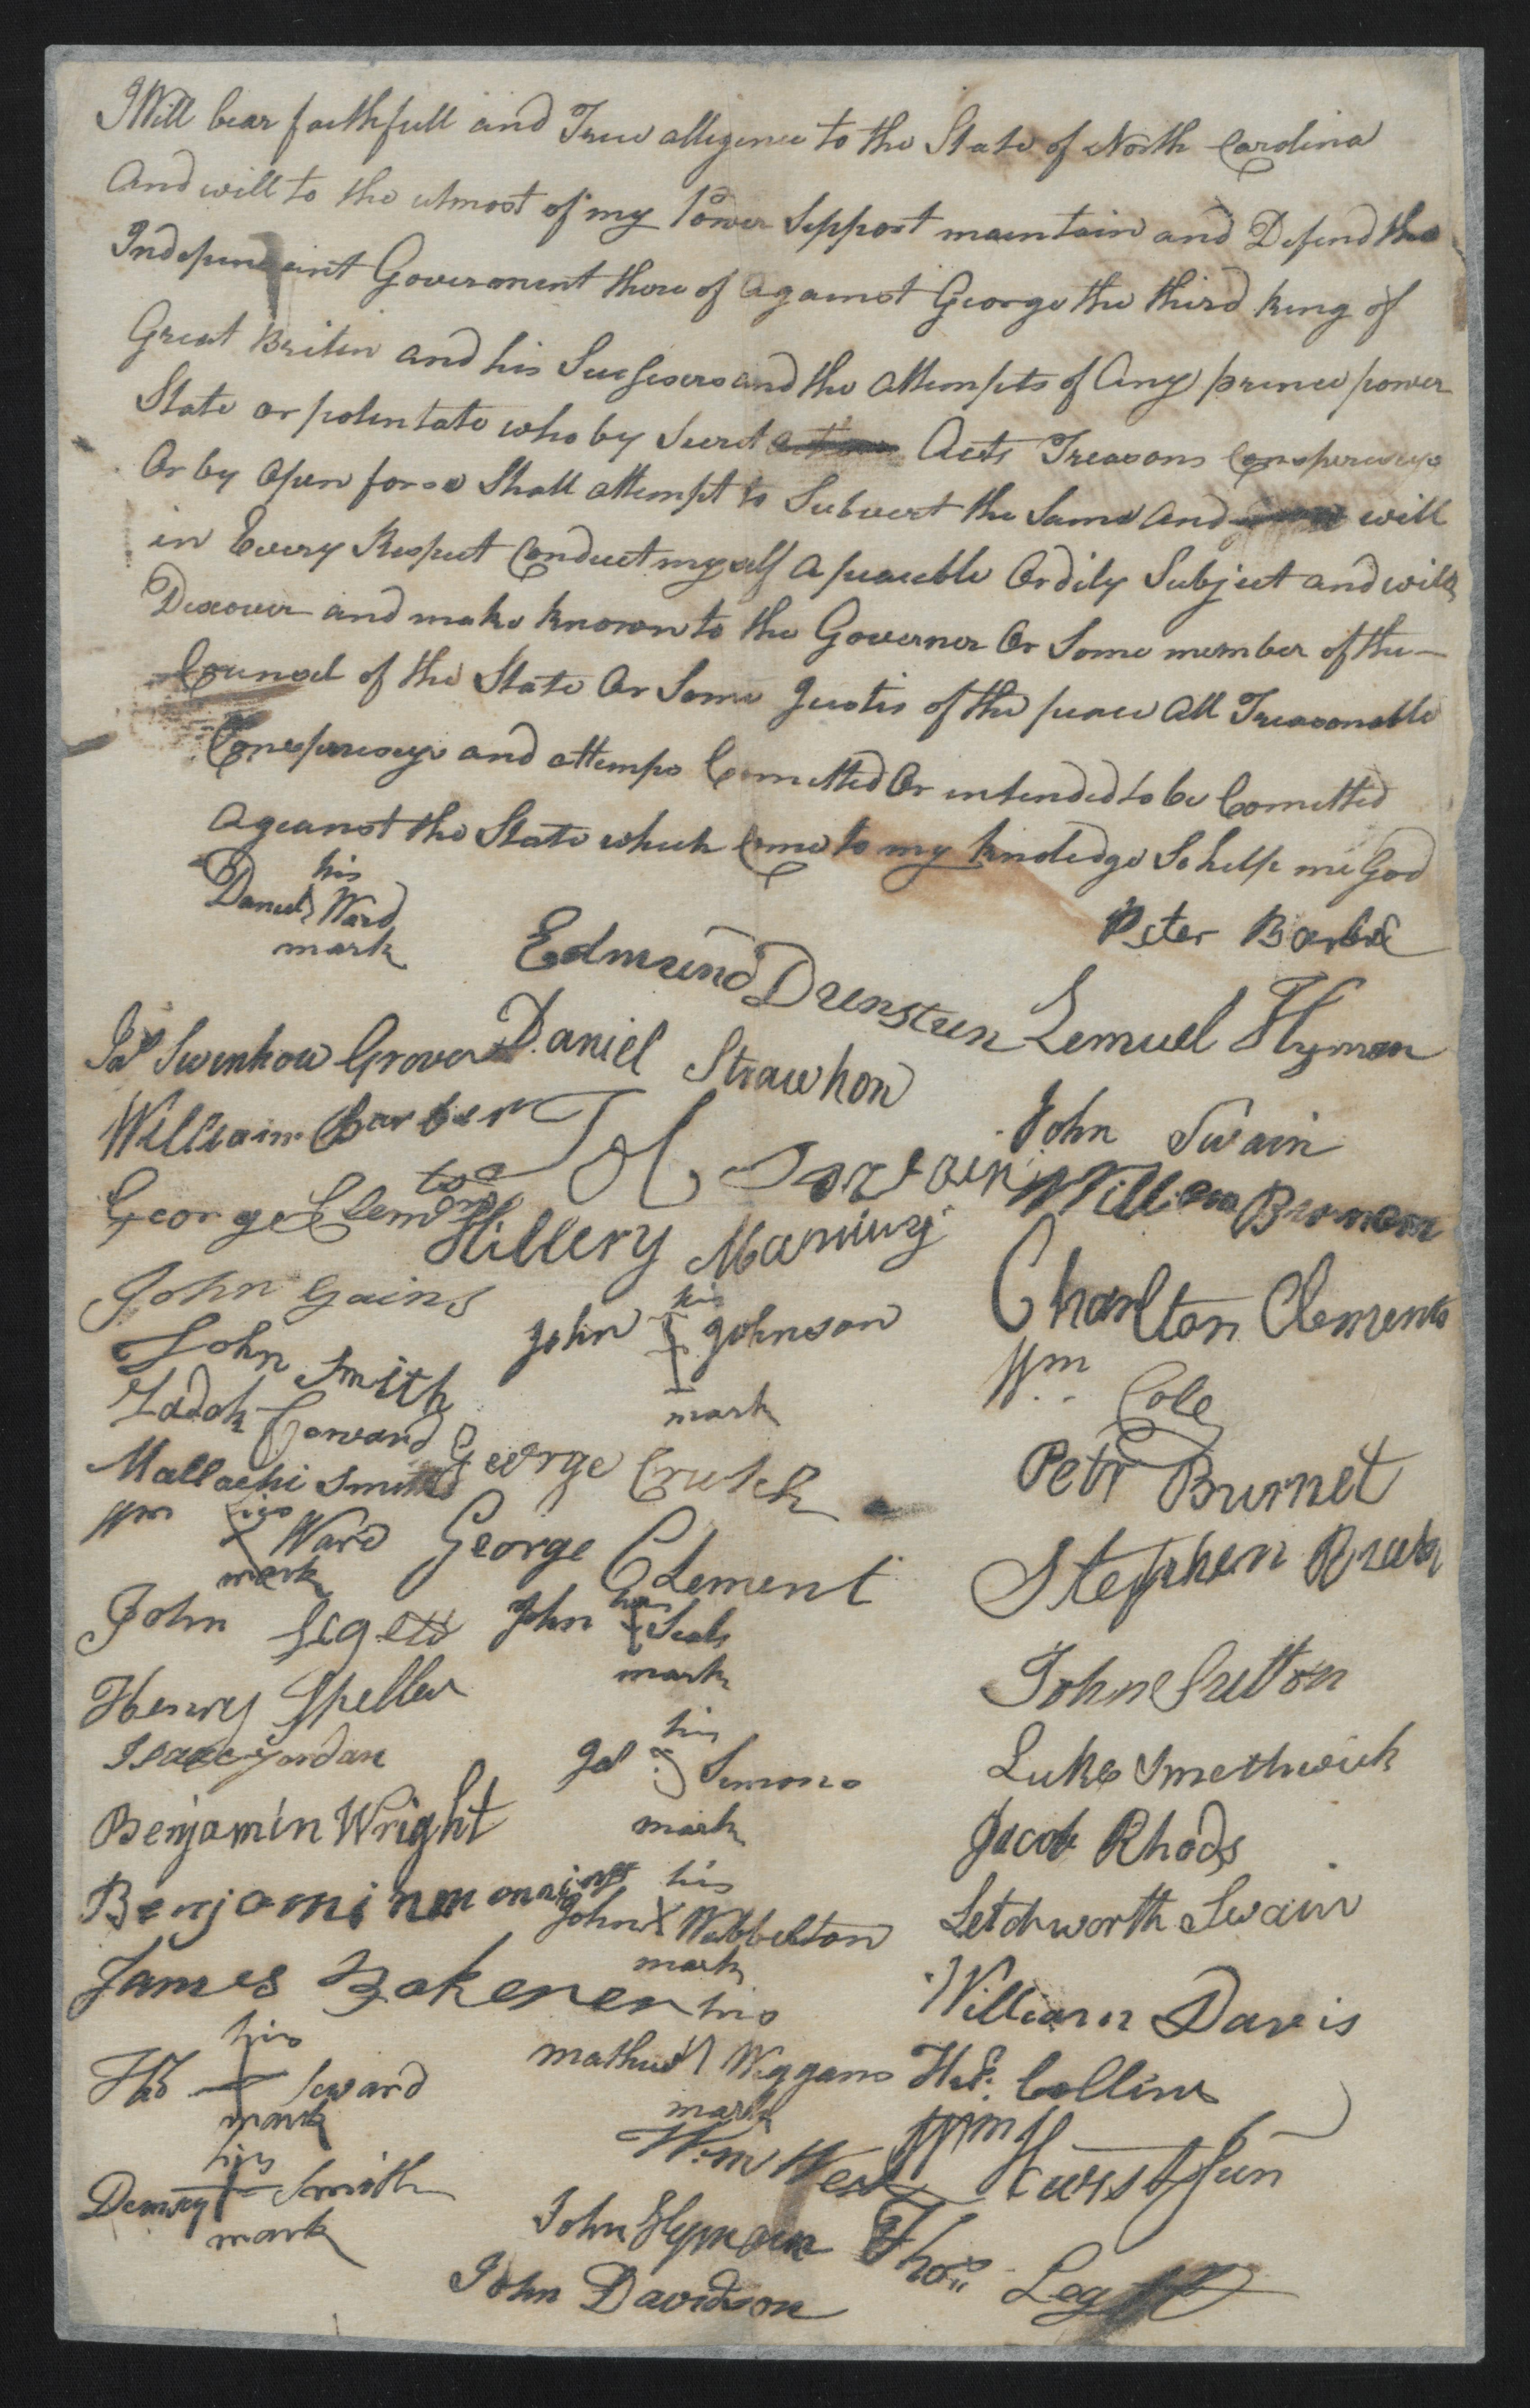 List of People Swearing the Oath of Allegiance to the State of North Carolina in Bertie County, circa 1778, page 1